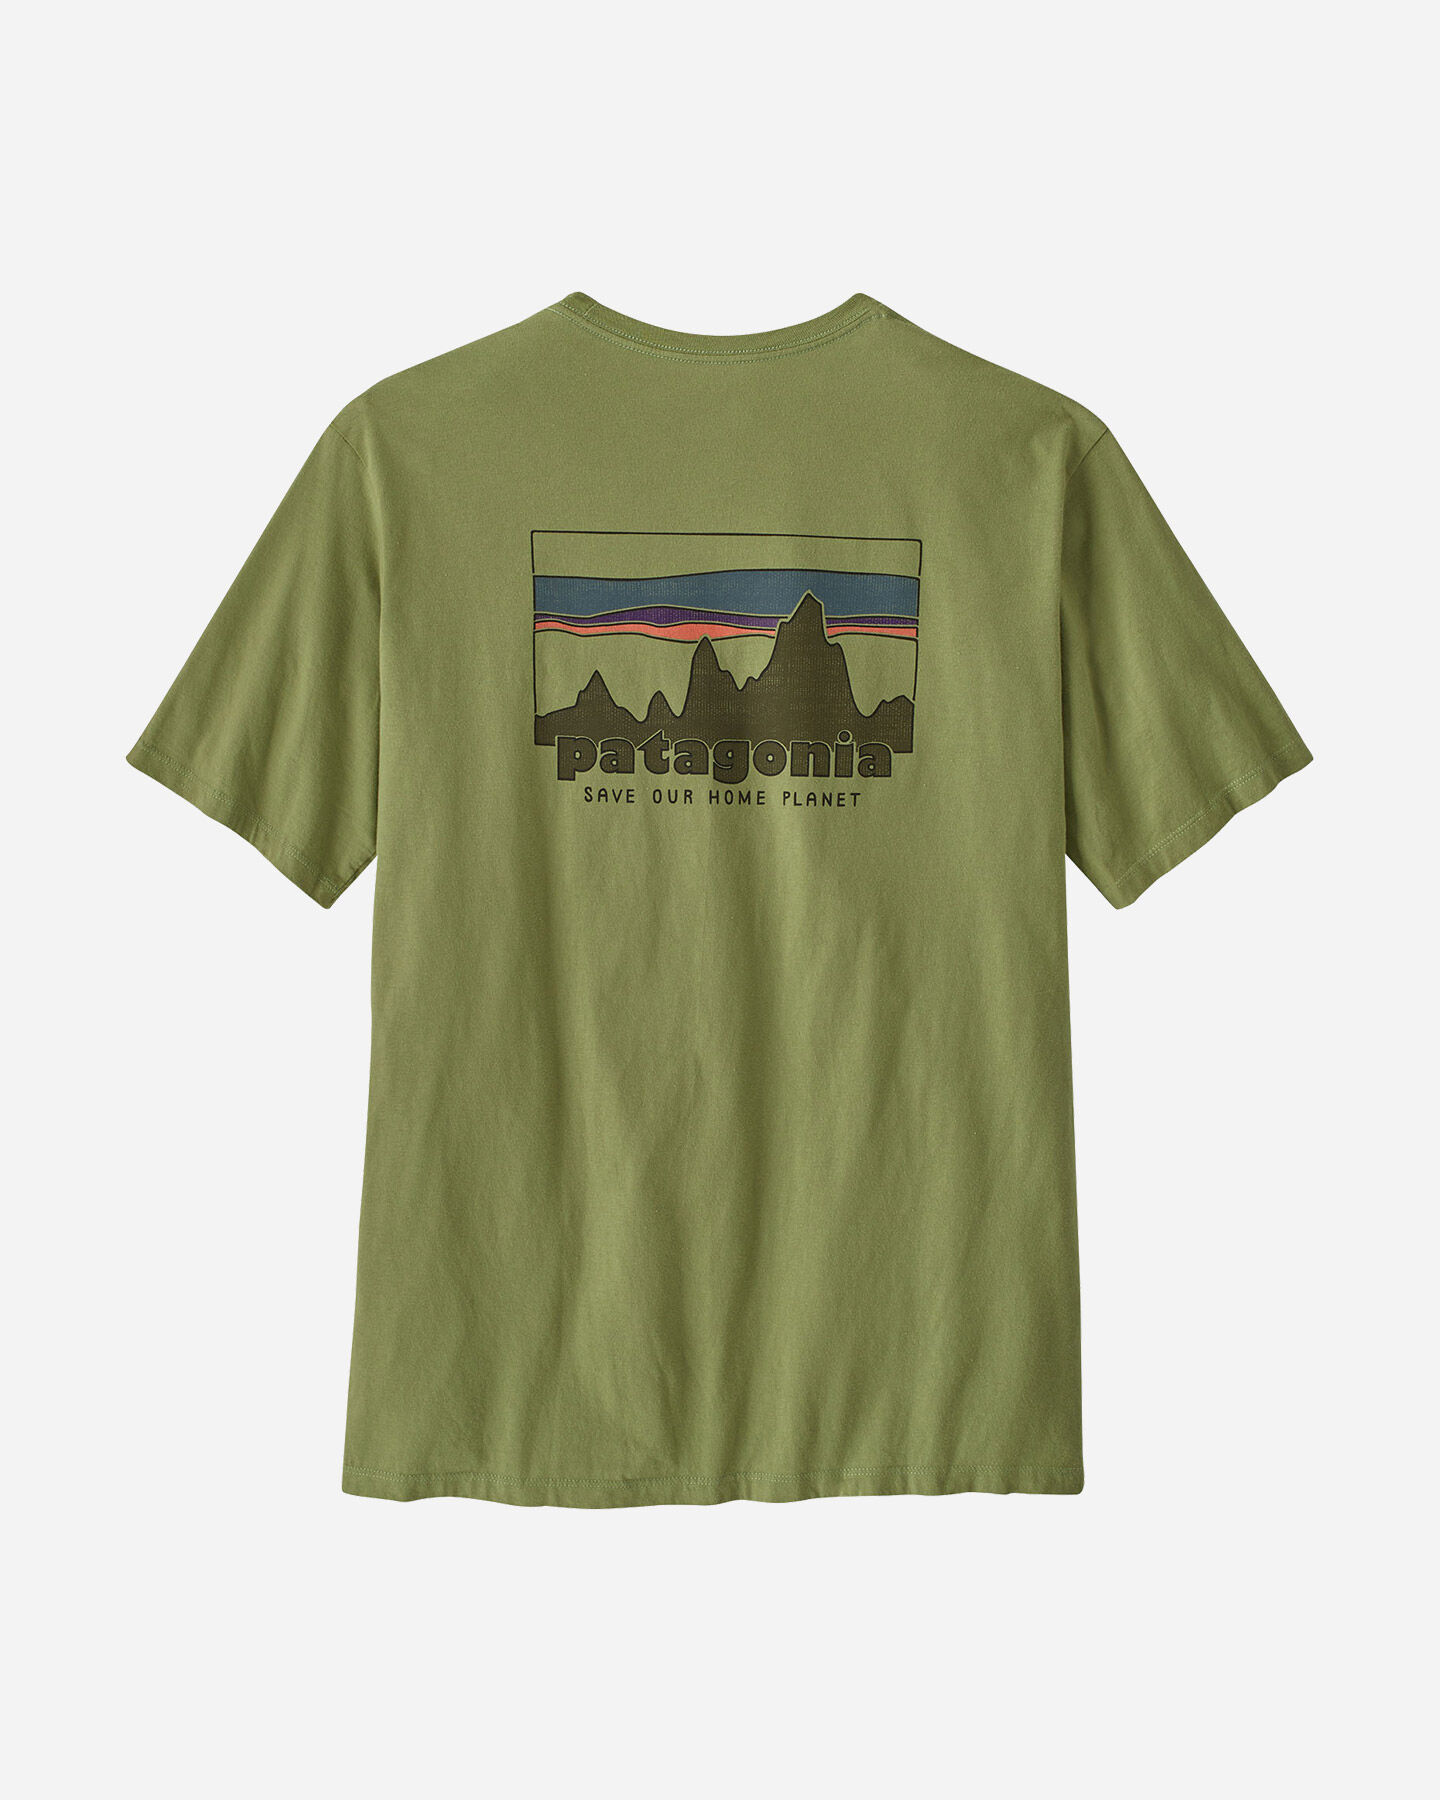  T-Shirt PATAGONIA 73 SKYLINE M S5681650|BUGR|S scatto 1